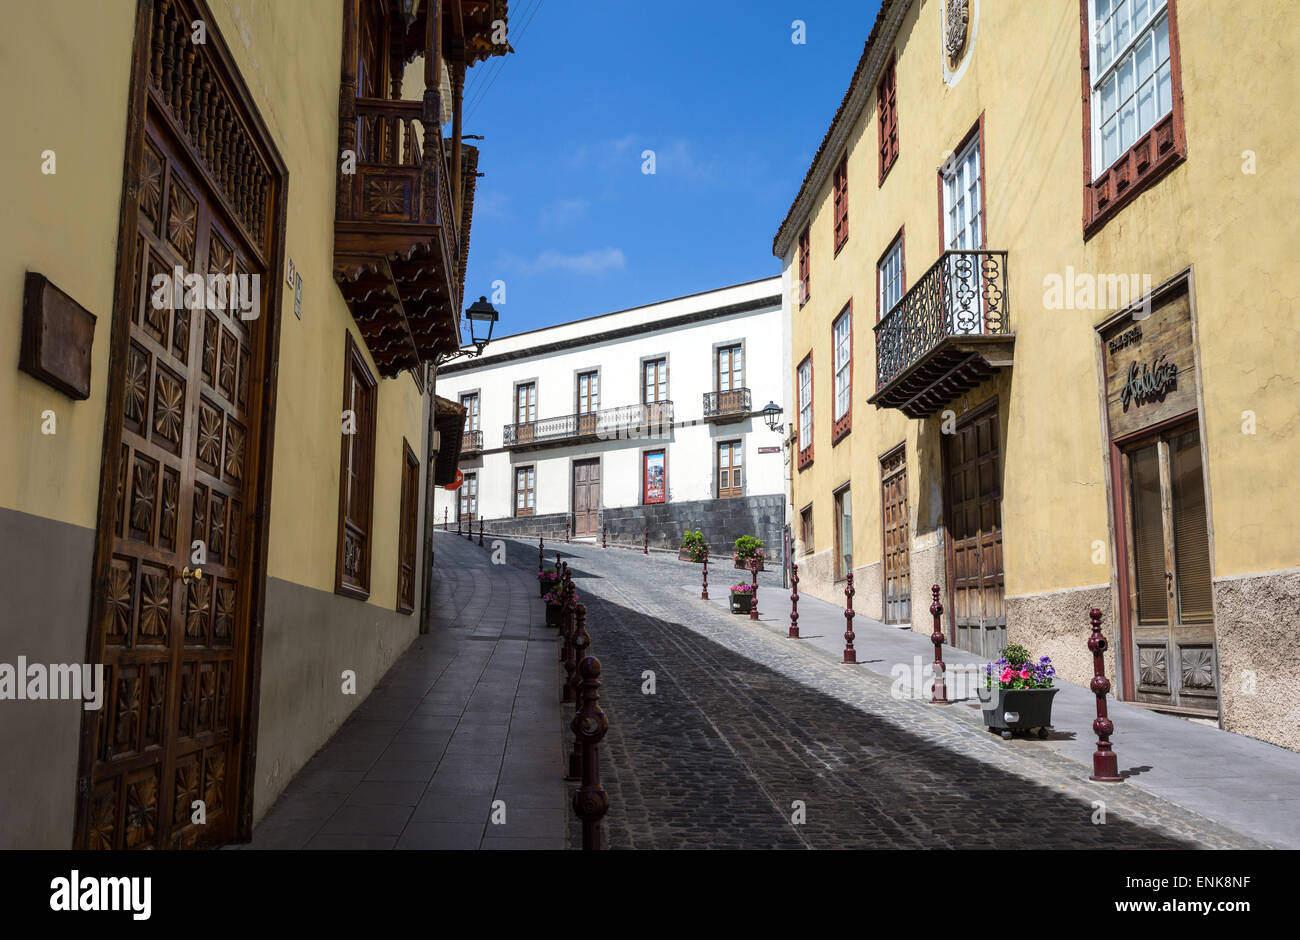 Tenerife, La Orotava, traditional colored houses in the old town center Stock Photo